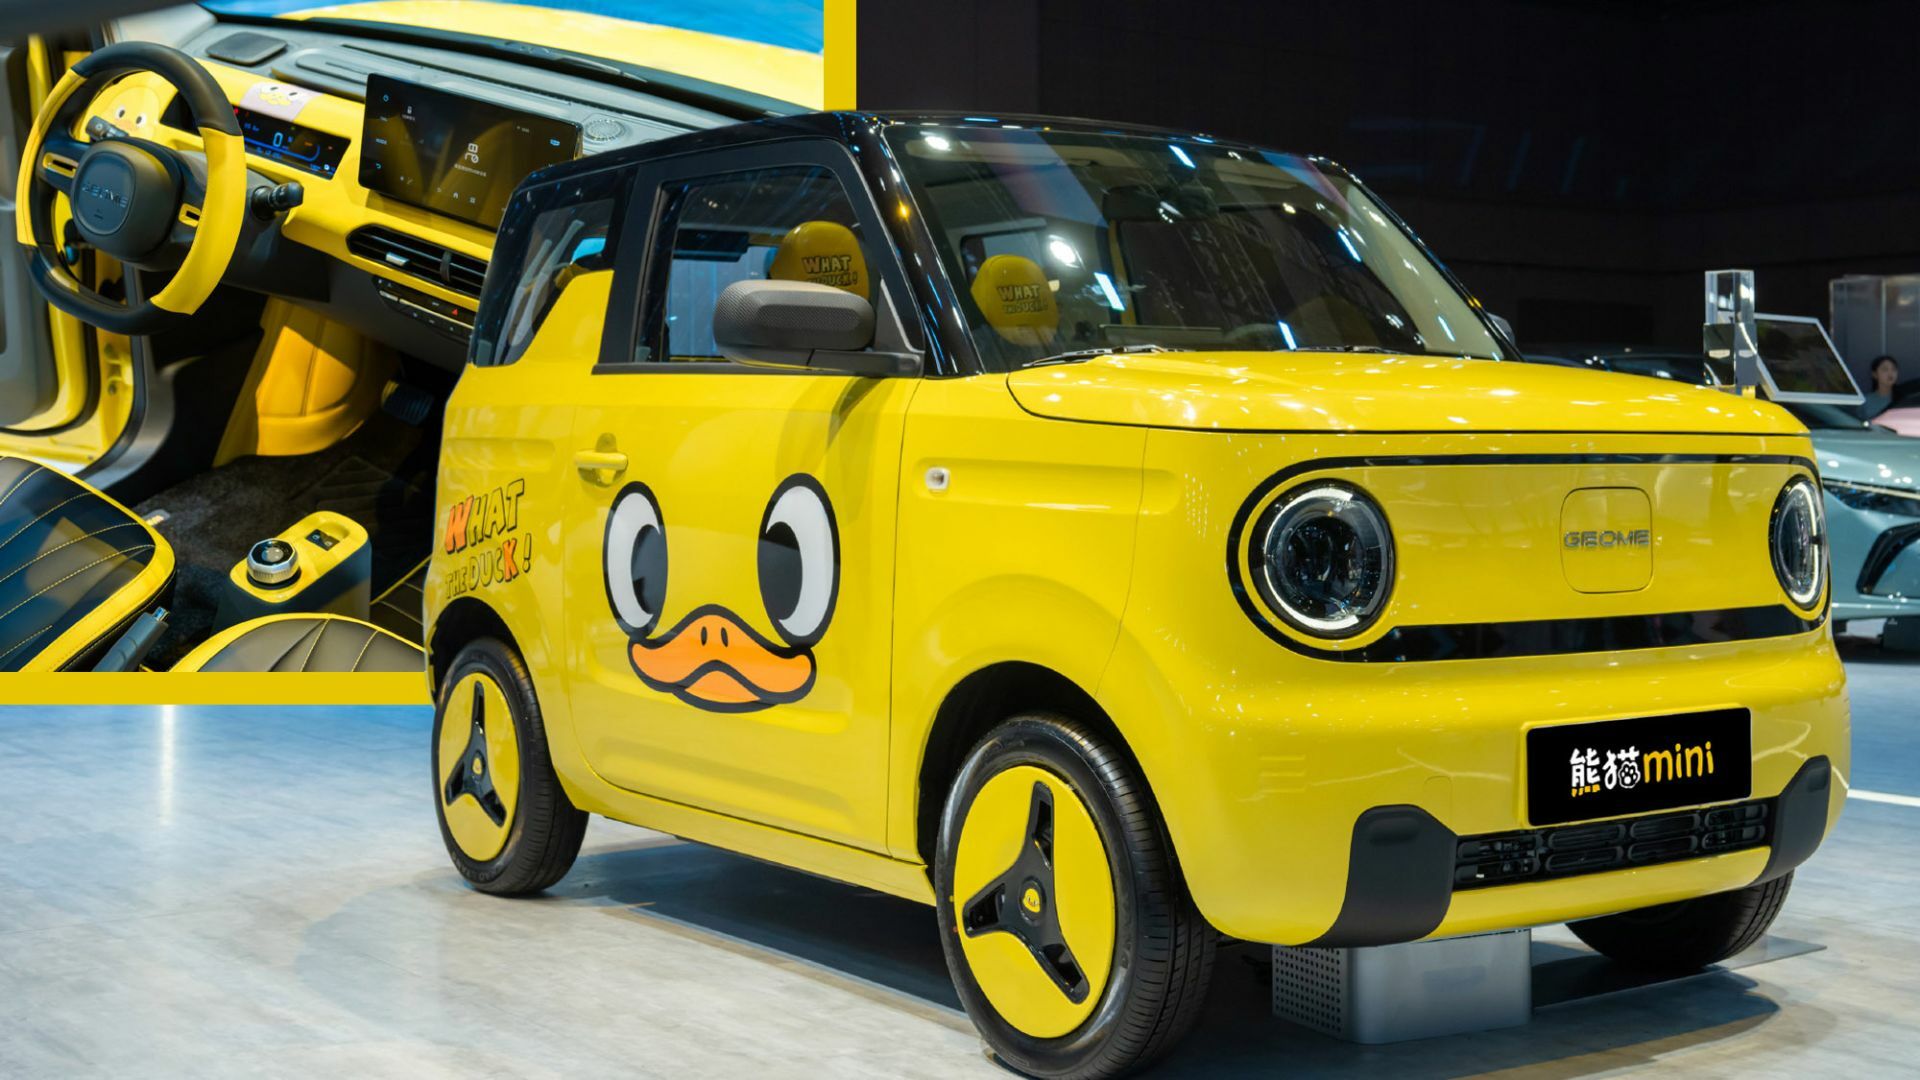 Geely Takes A Quack At EVs With Duck-Themed Panda Mini Limited